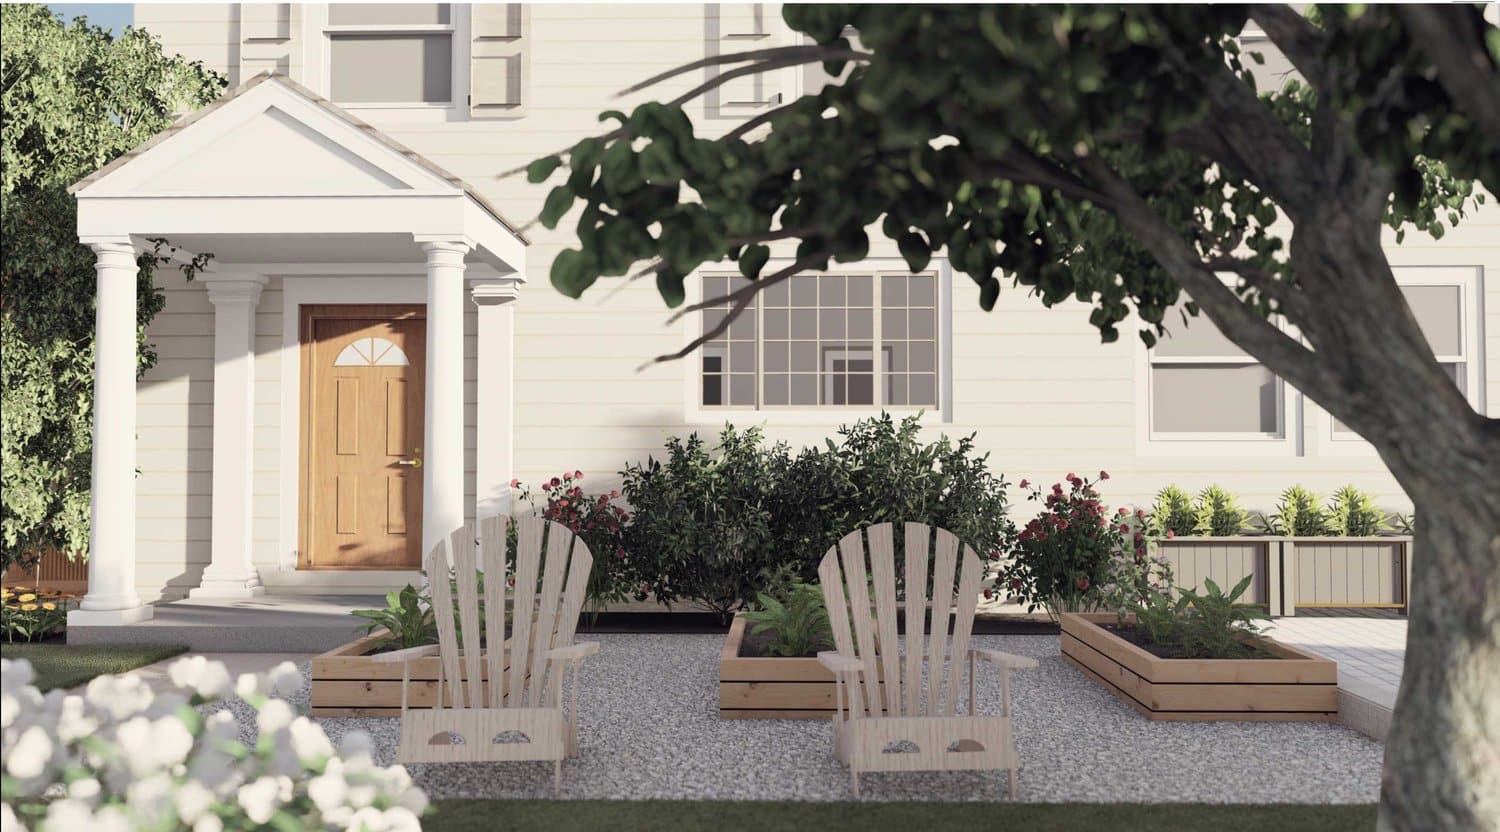 Arlington front yard with adirondack chairs and plant beds on gravel